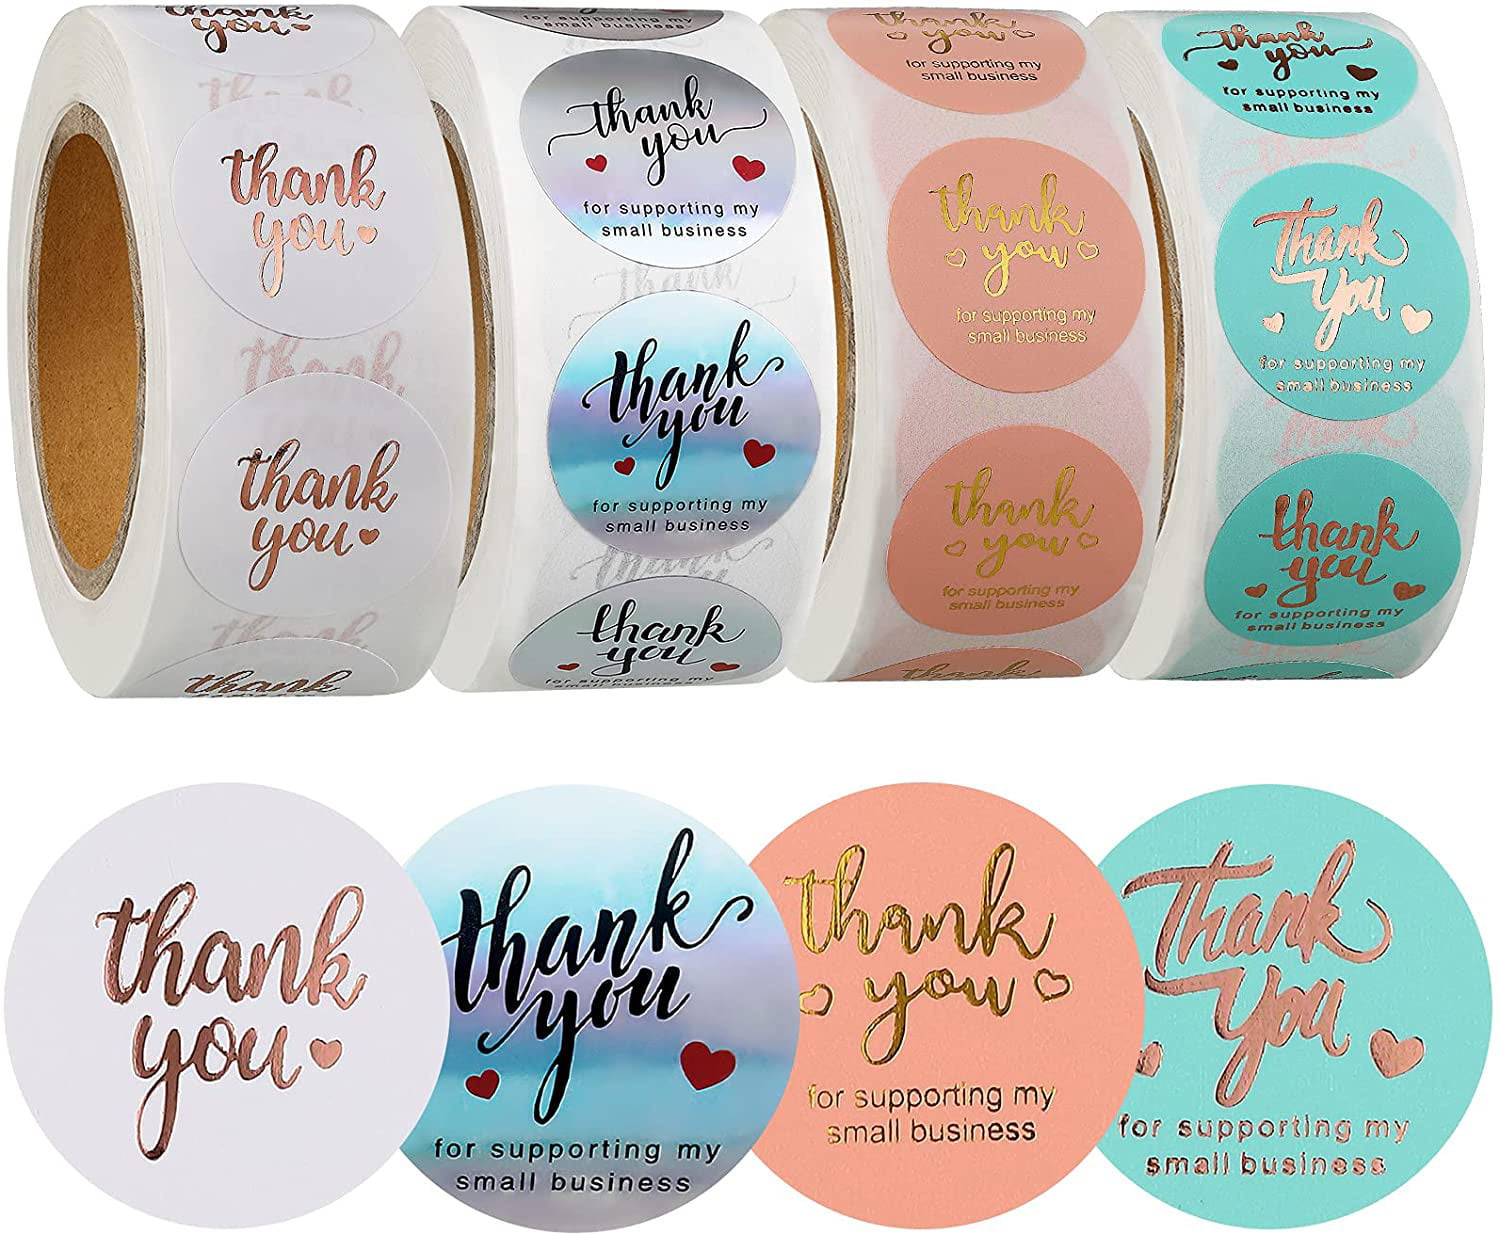 Thank You Stickers Labels for Small Business，4 Rolls 2000 Pieces ，Thank You for Supporting My Small Business Stickers for Gift Bags Packaging/Envelopes/Bubble Mailers，1 Inch，500 Pieces Each Roll 